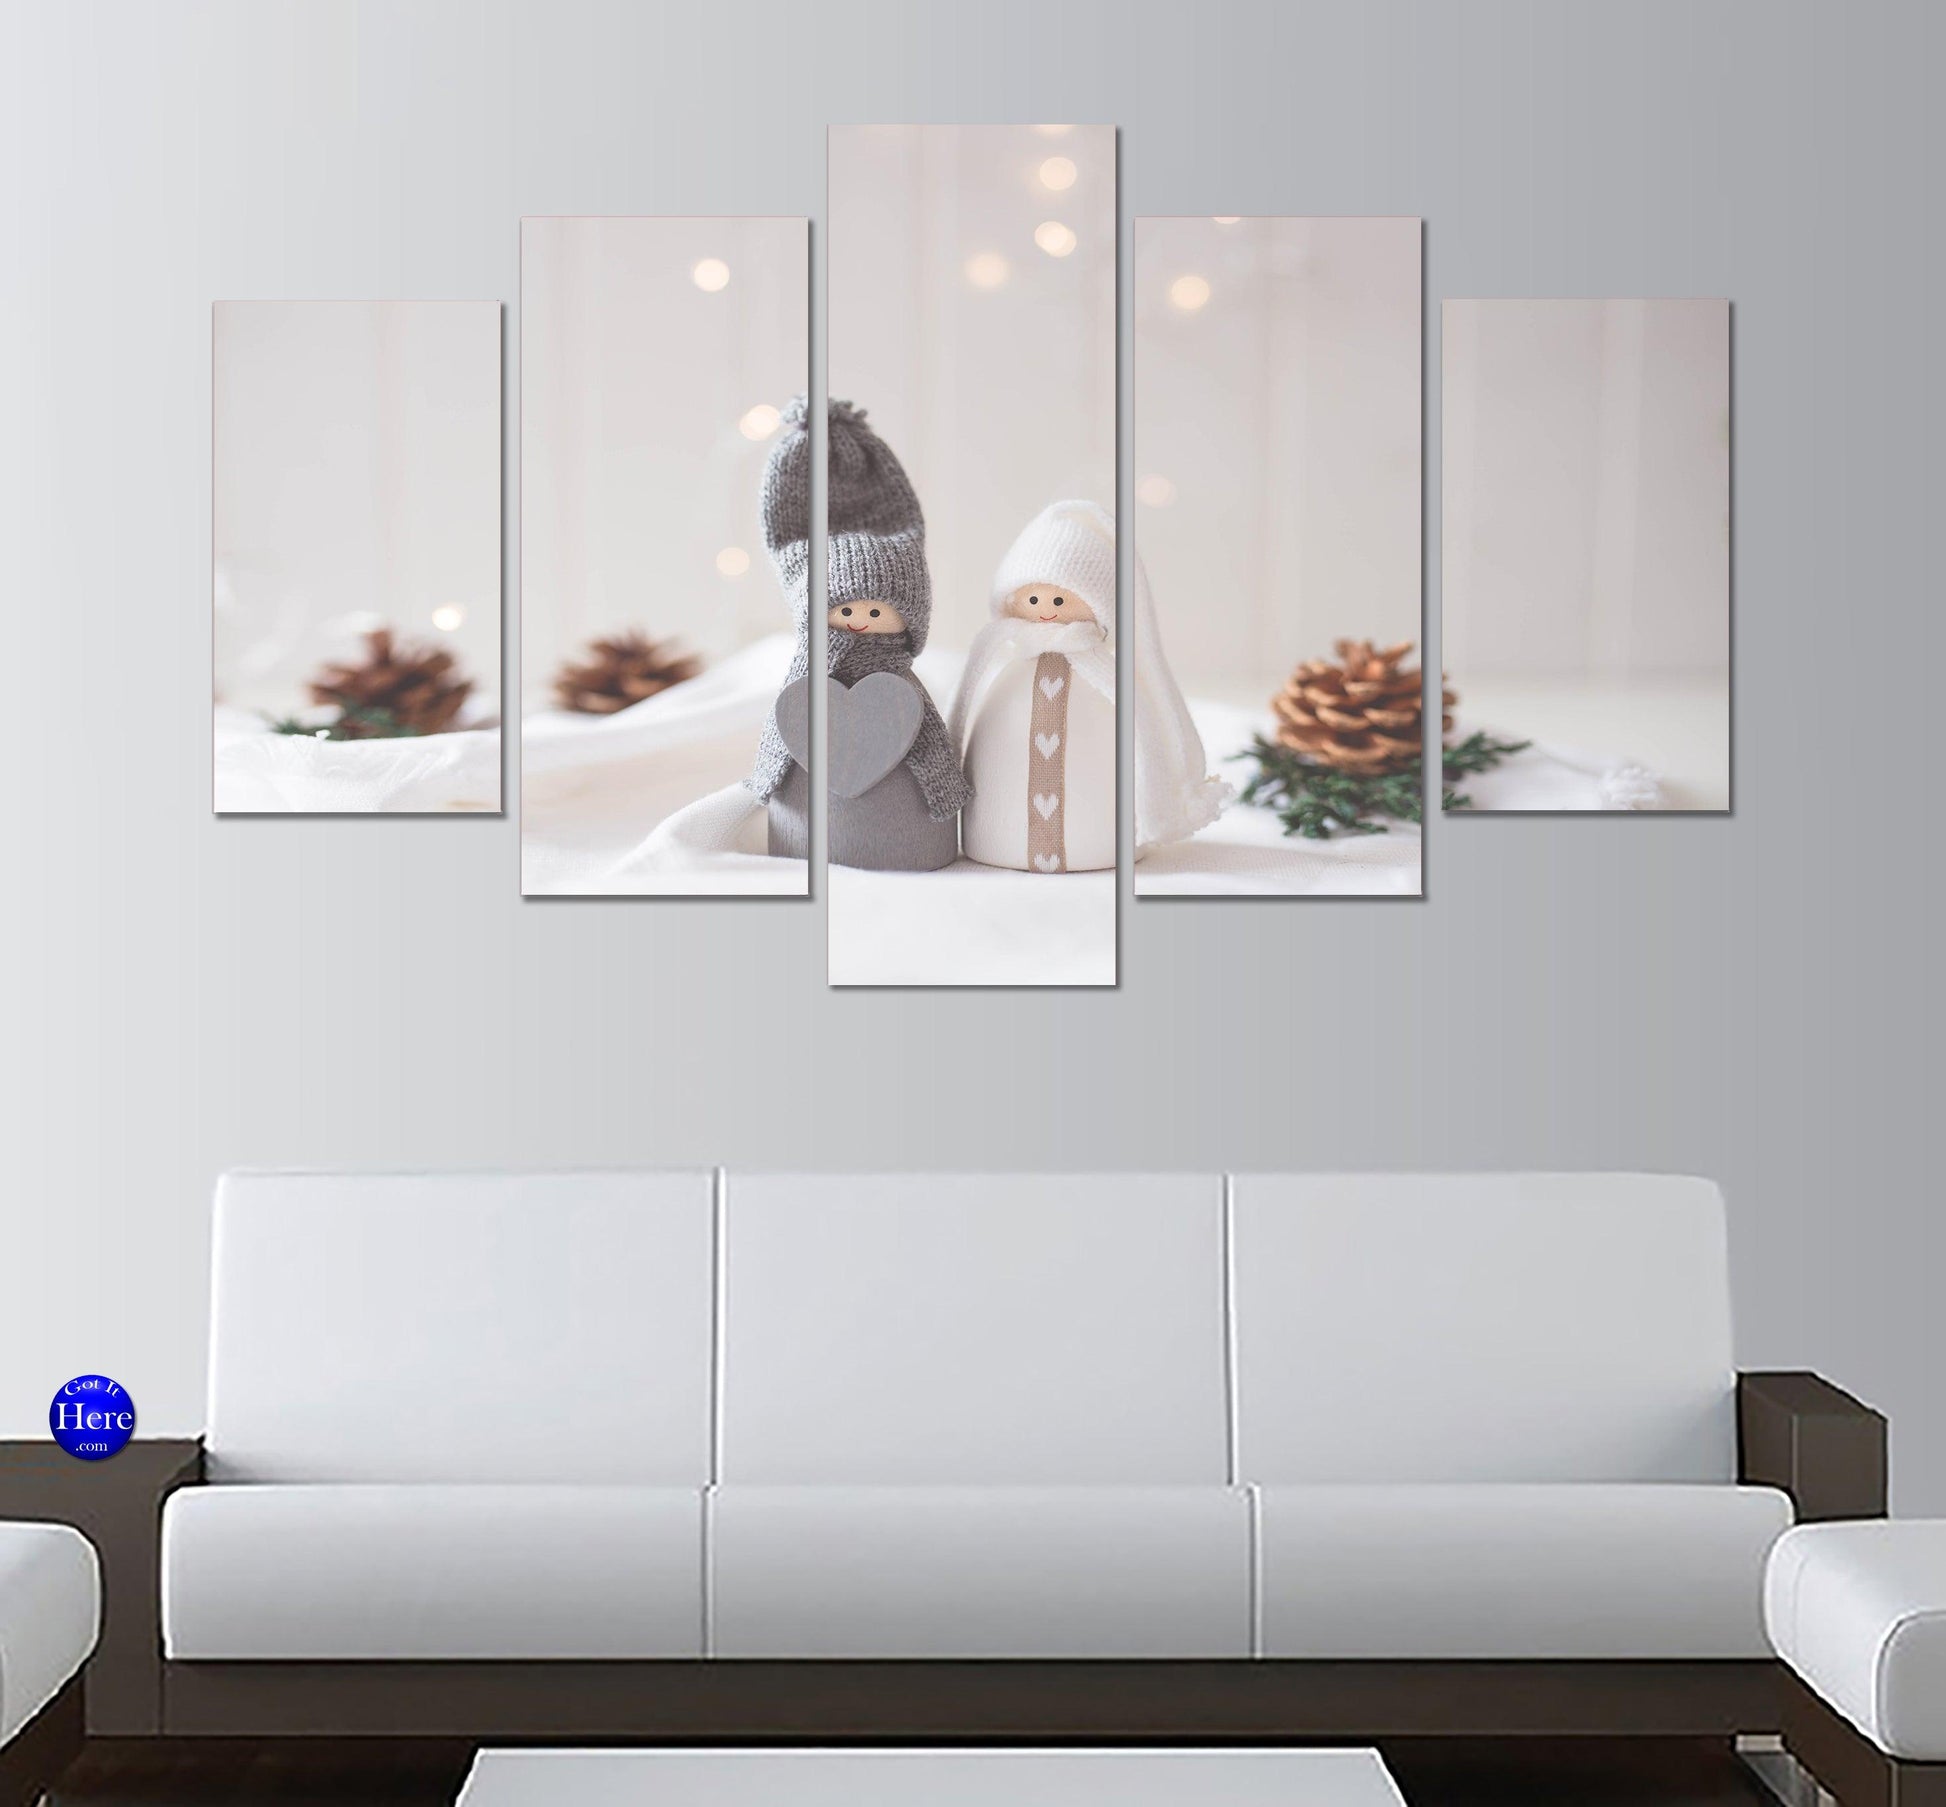 Christmas Figurines Couple In The Snow 5 Panel Canvas Print Wall Art - GotItHere.com